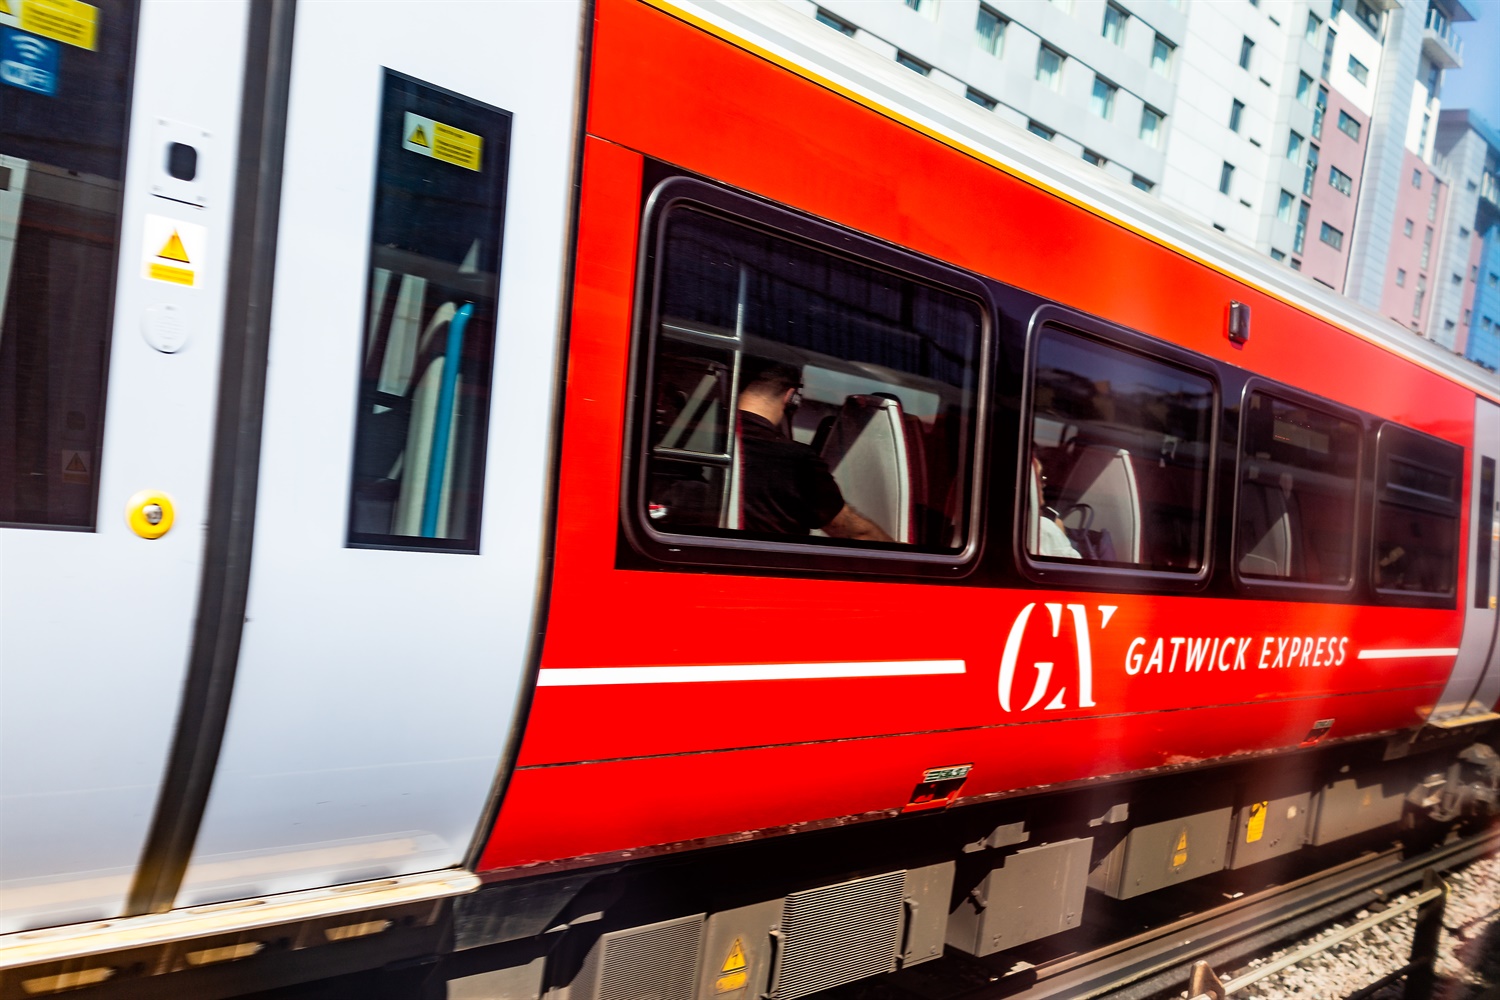 ‘Light at the end of the tunnel’ as Gatwick Express trains trial due to start